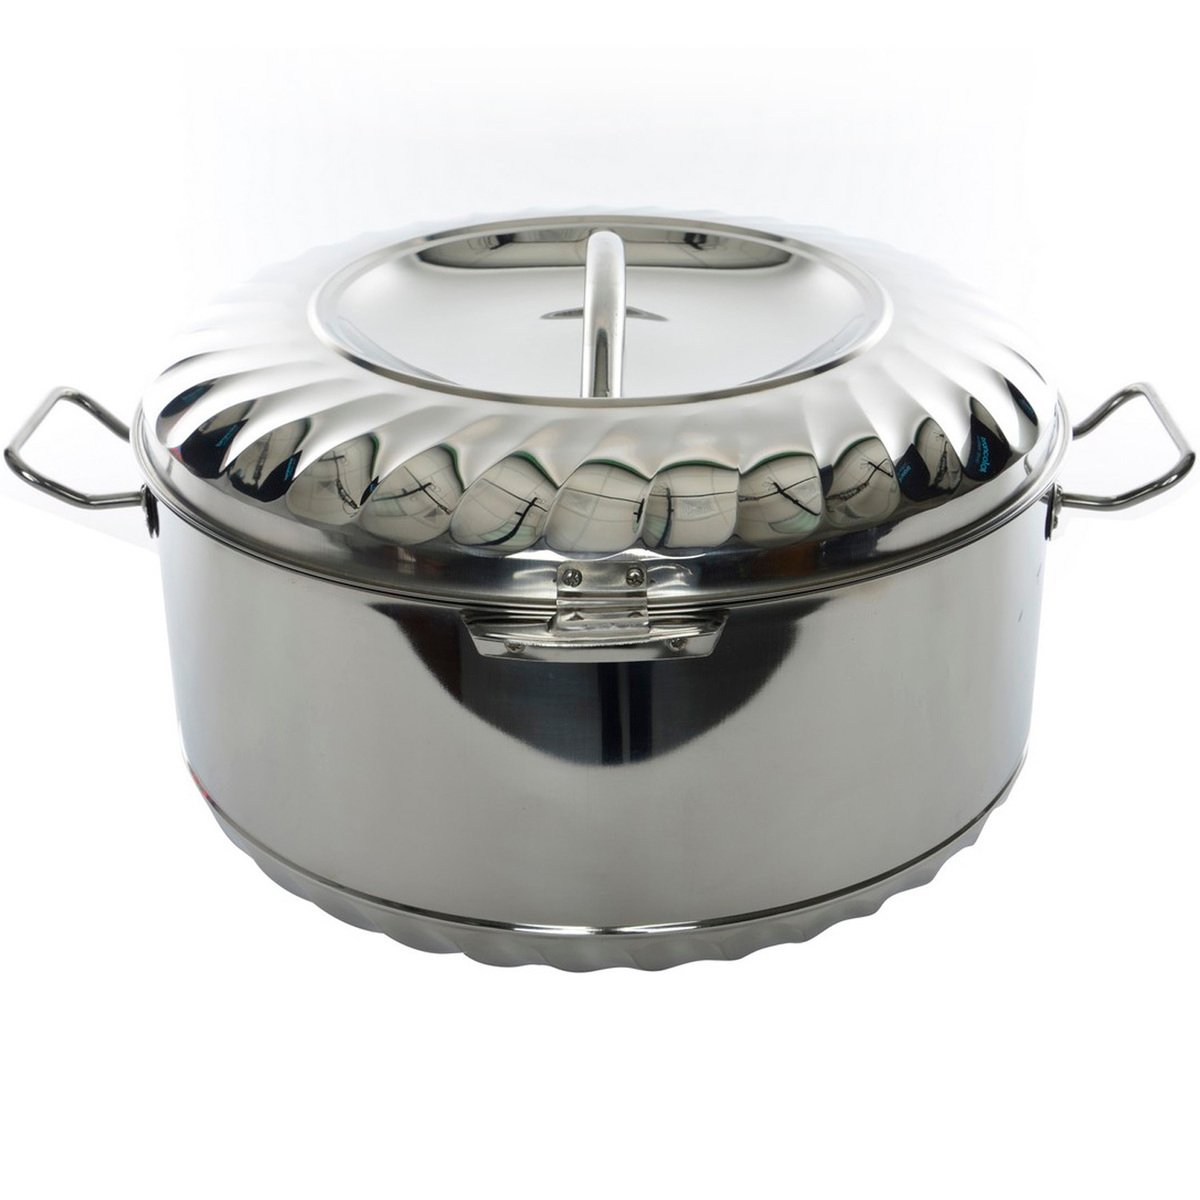 Chefline Stainless Steel Hot Pot Solitaire 3500ml